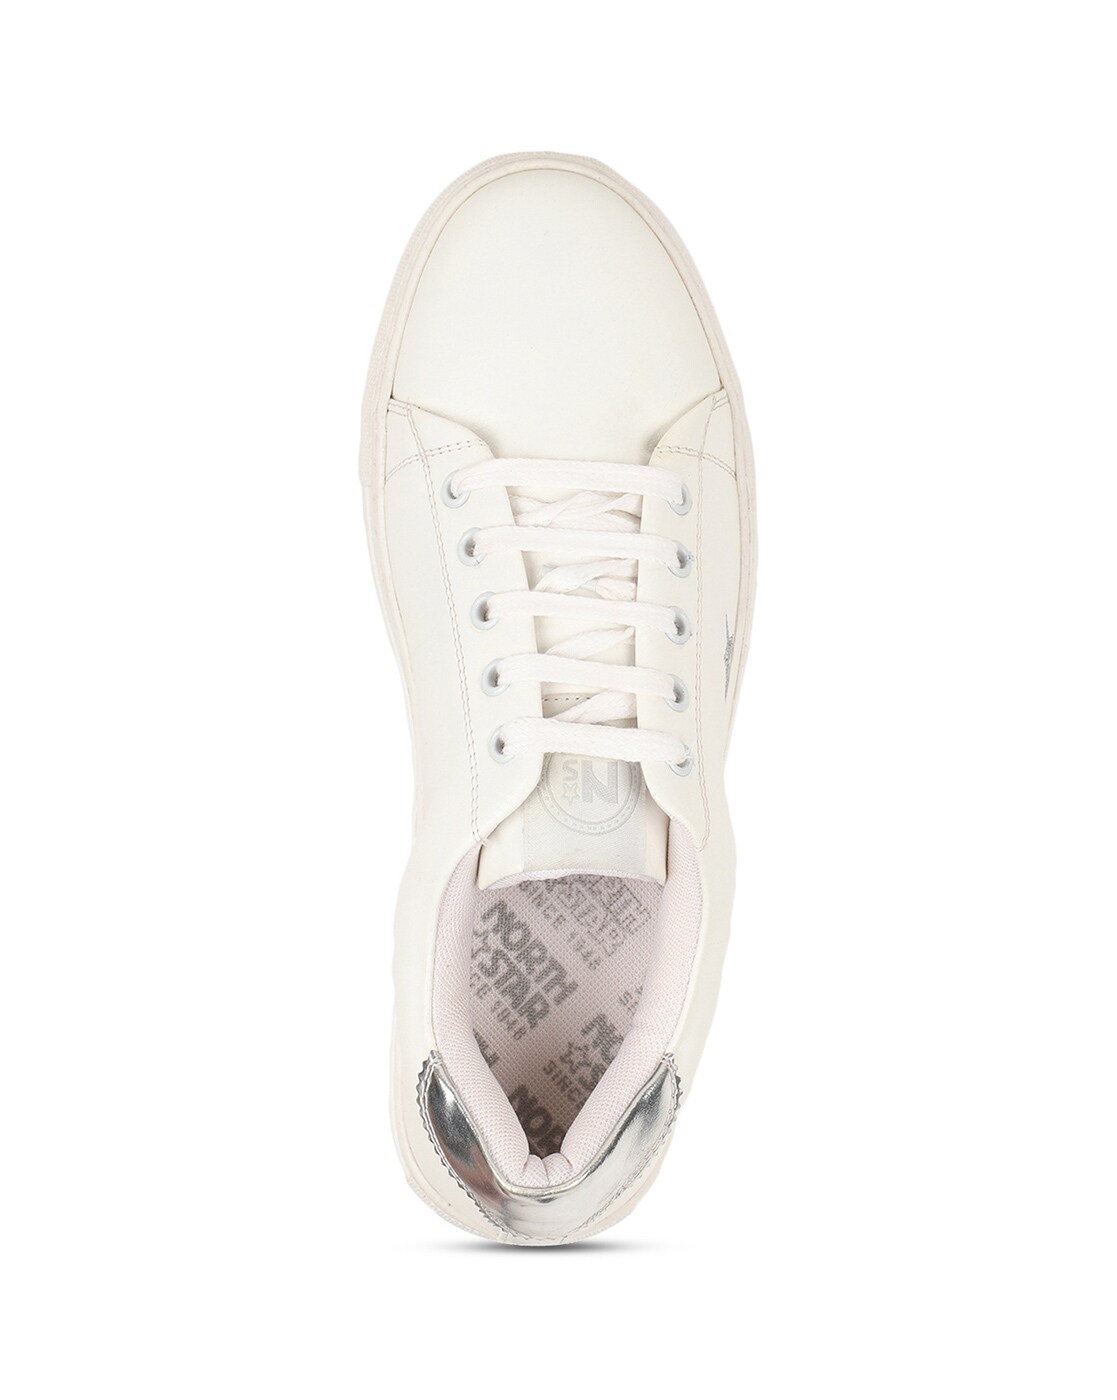 New with Tag BATA NORTH STAR WHITE SNEAKER FOR WOMEN | White sneaker, Bata,  Women